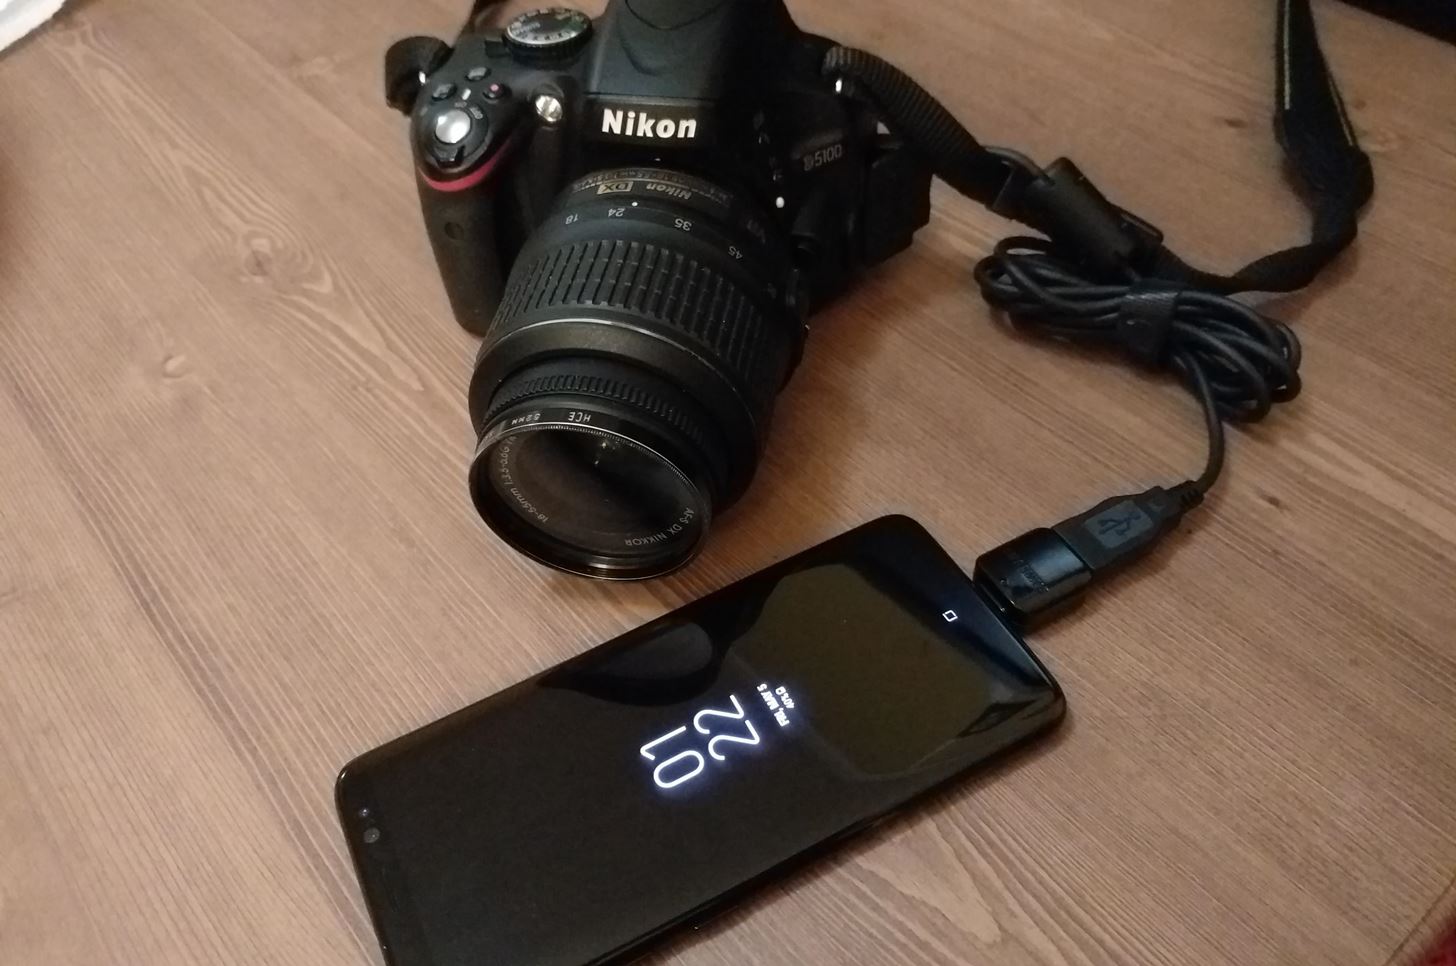 The Fastest Way to Transfer Photos & Videos from Your DSLR to Your Android